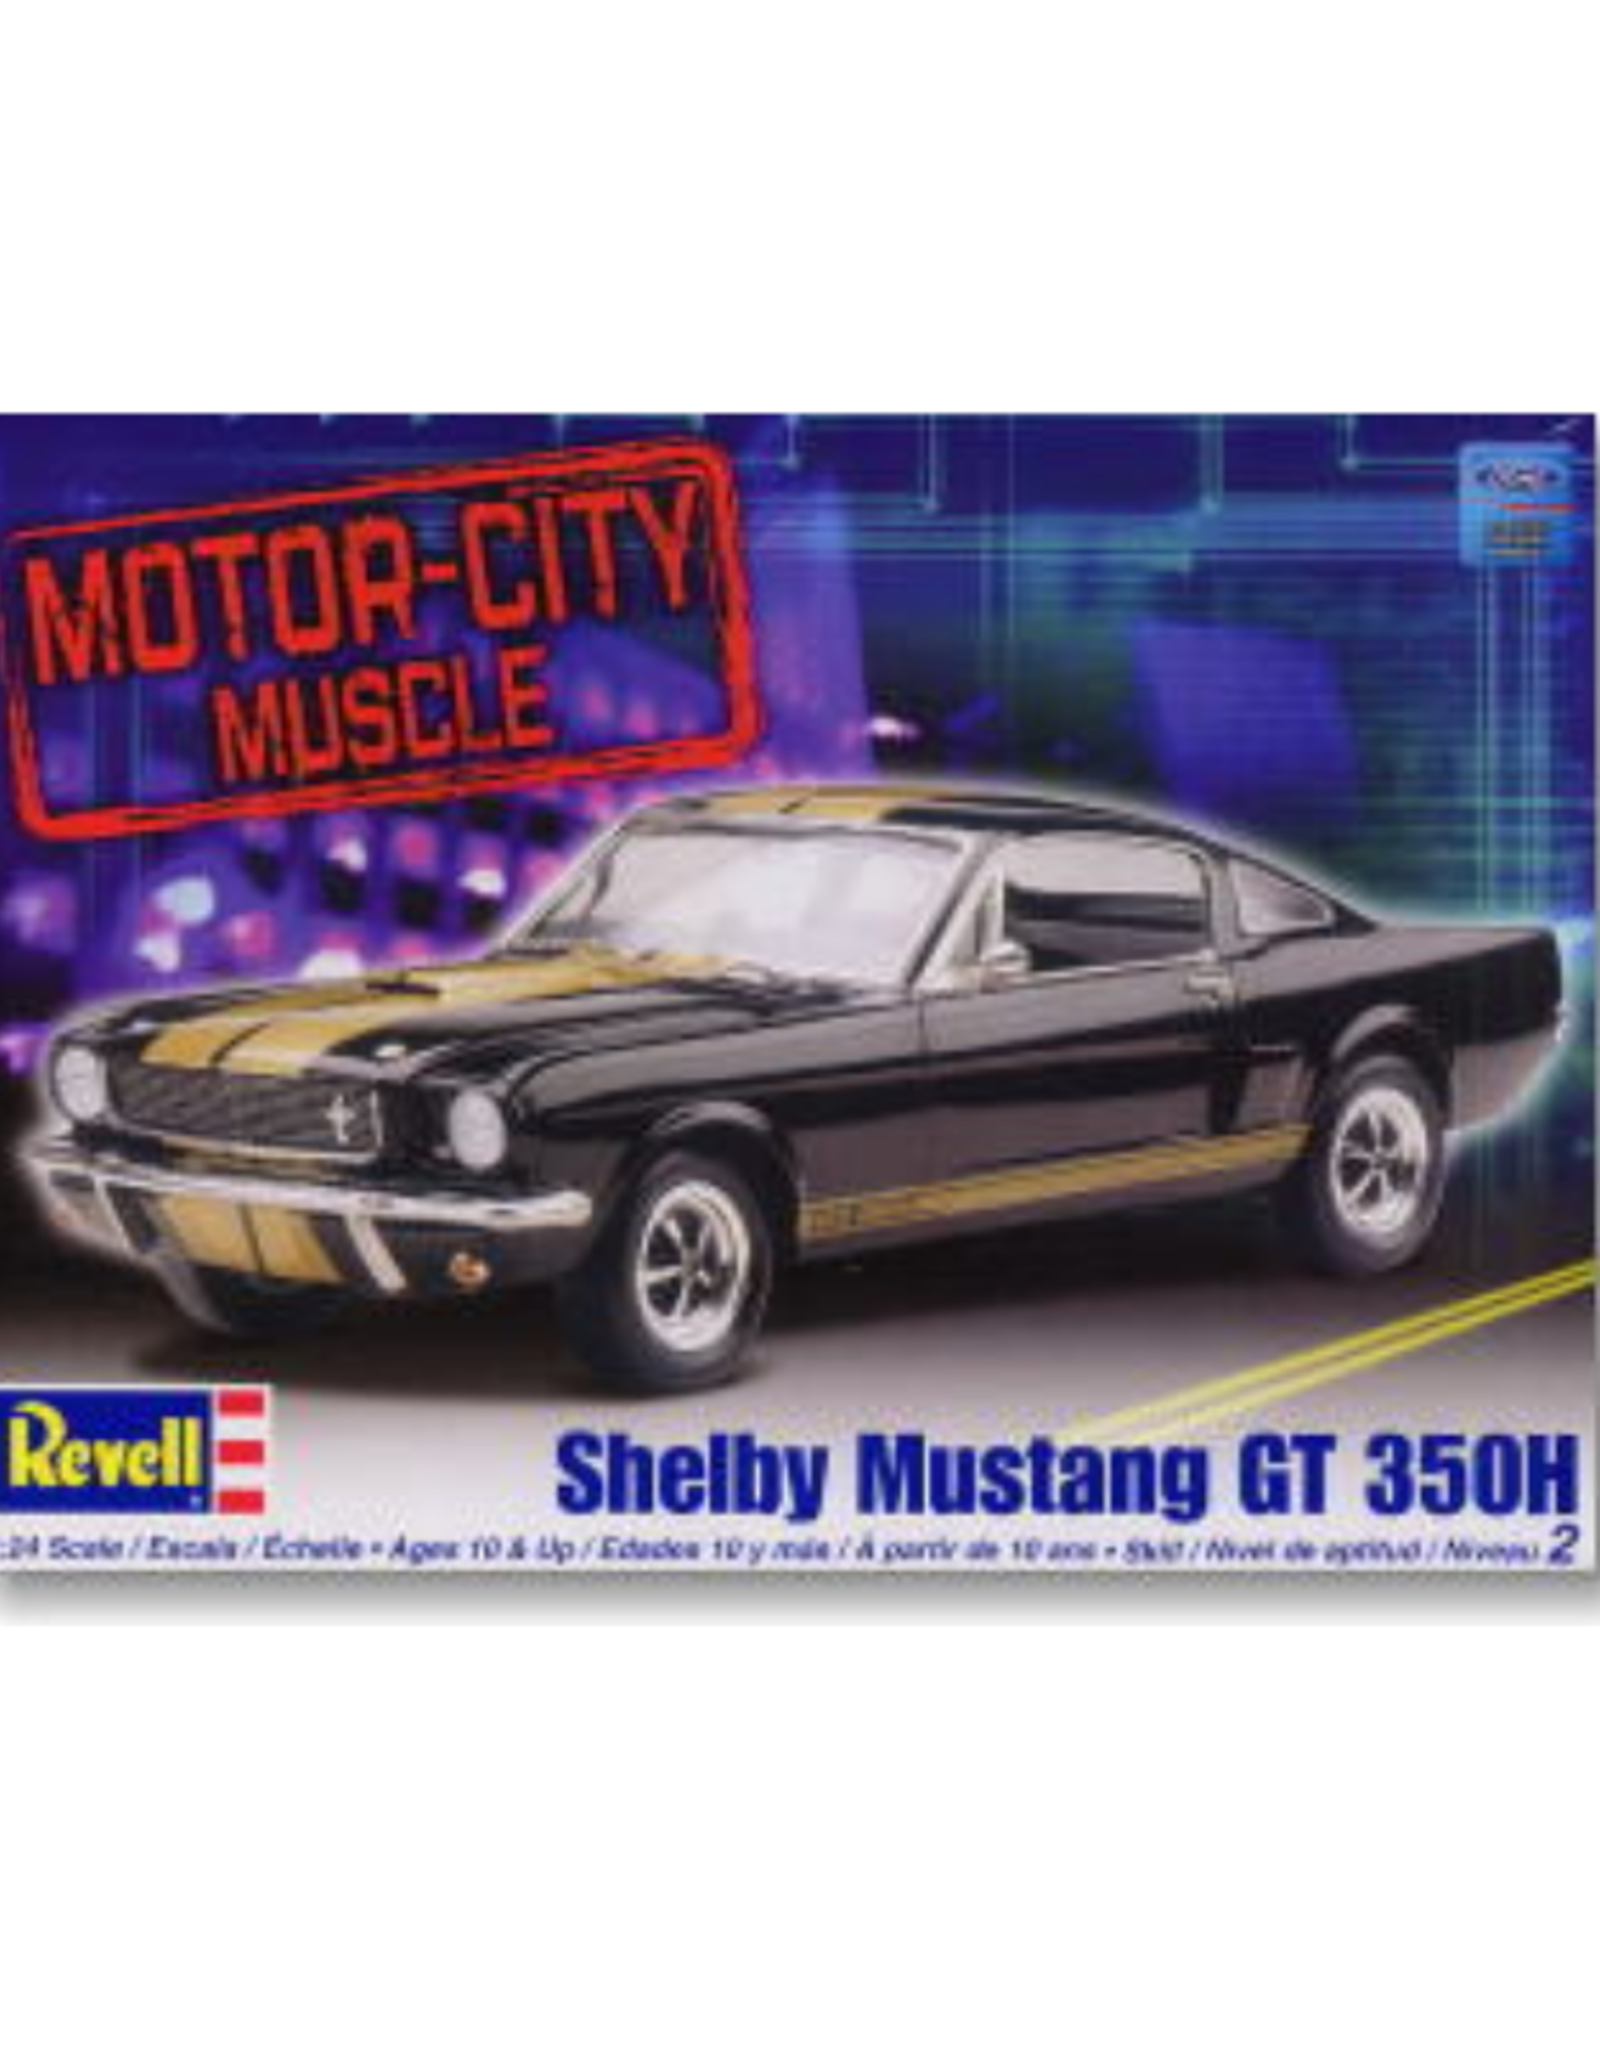 Revell '66 Shelby GT350H